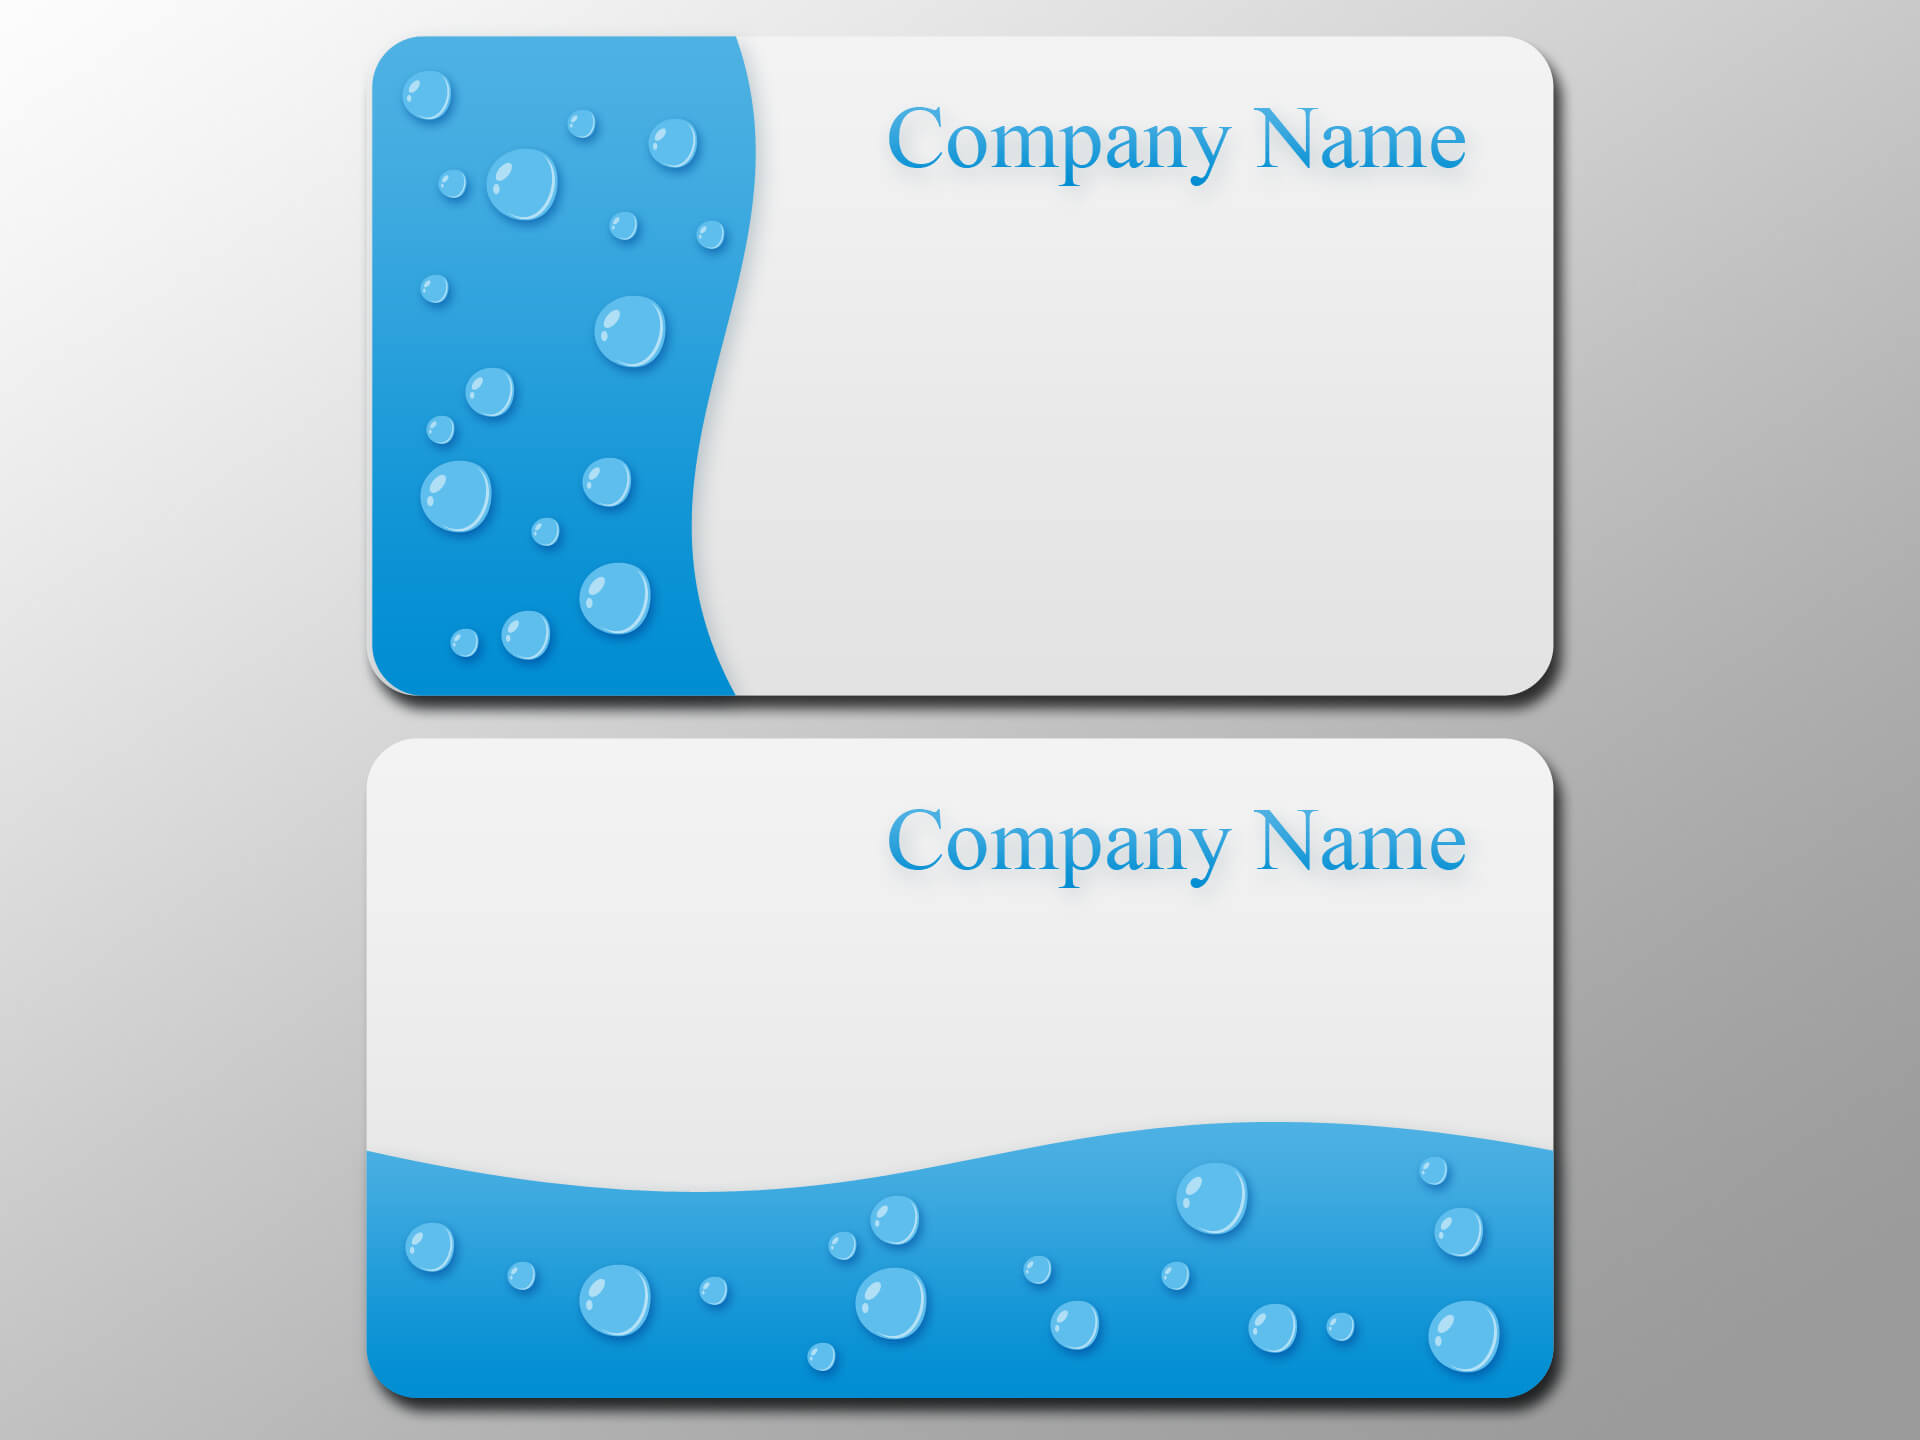 business-card-template-photoshop-blank-business-card-intended-for-blank-business-card-template